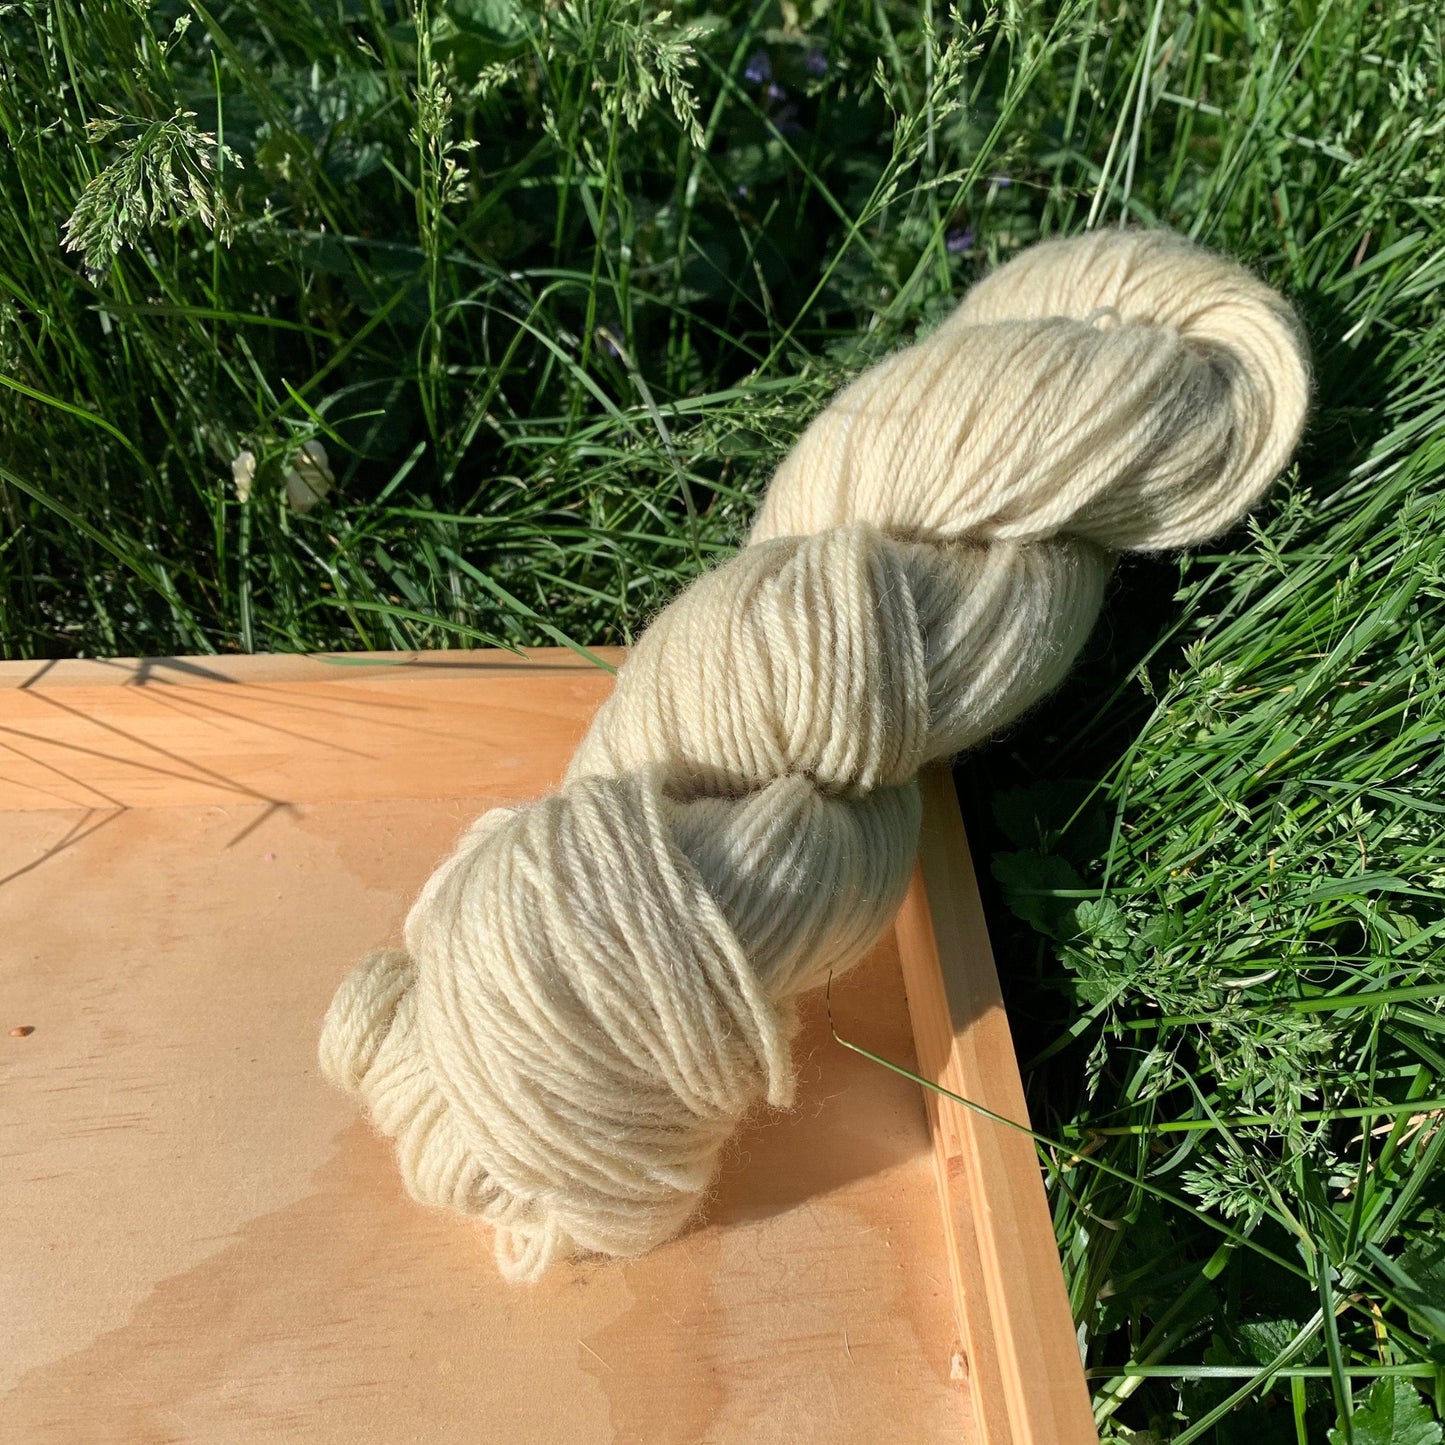 A skein of tan hand-dyed yarn on a wooden tray in grass.